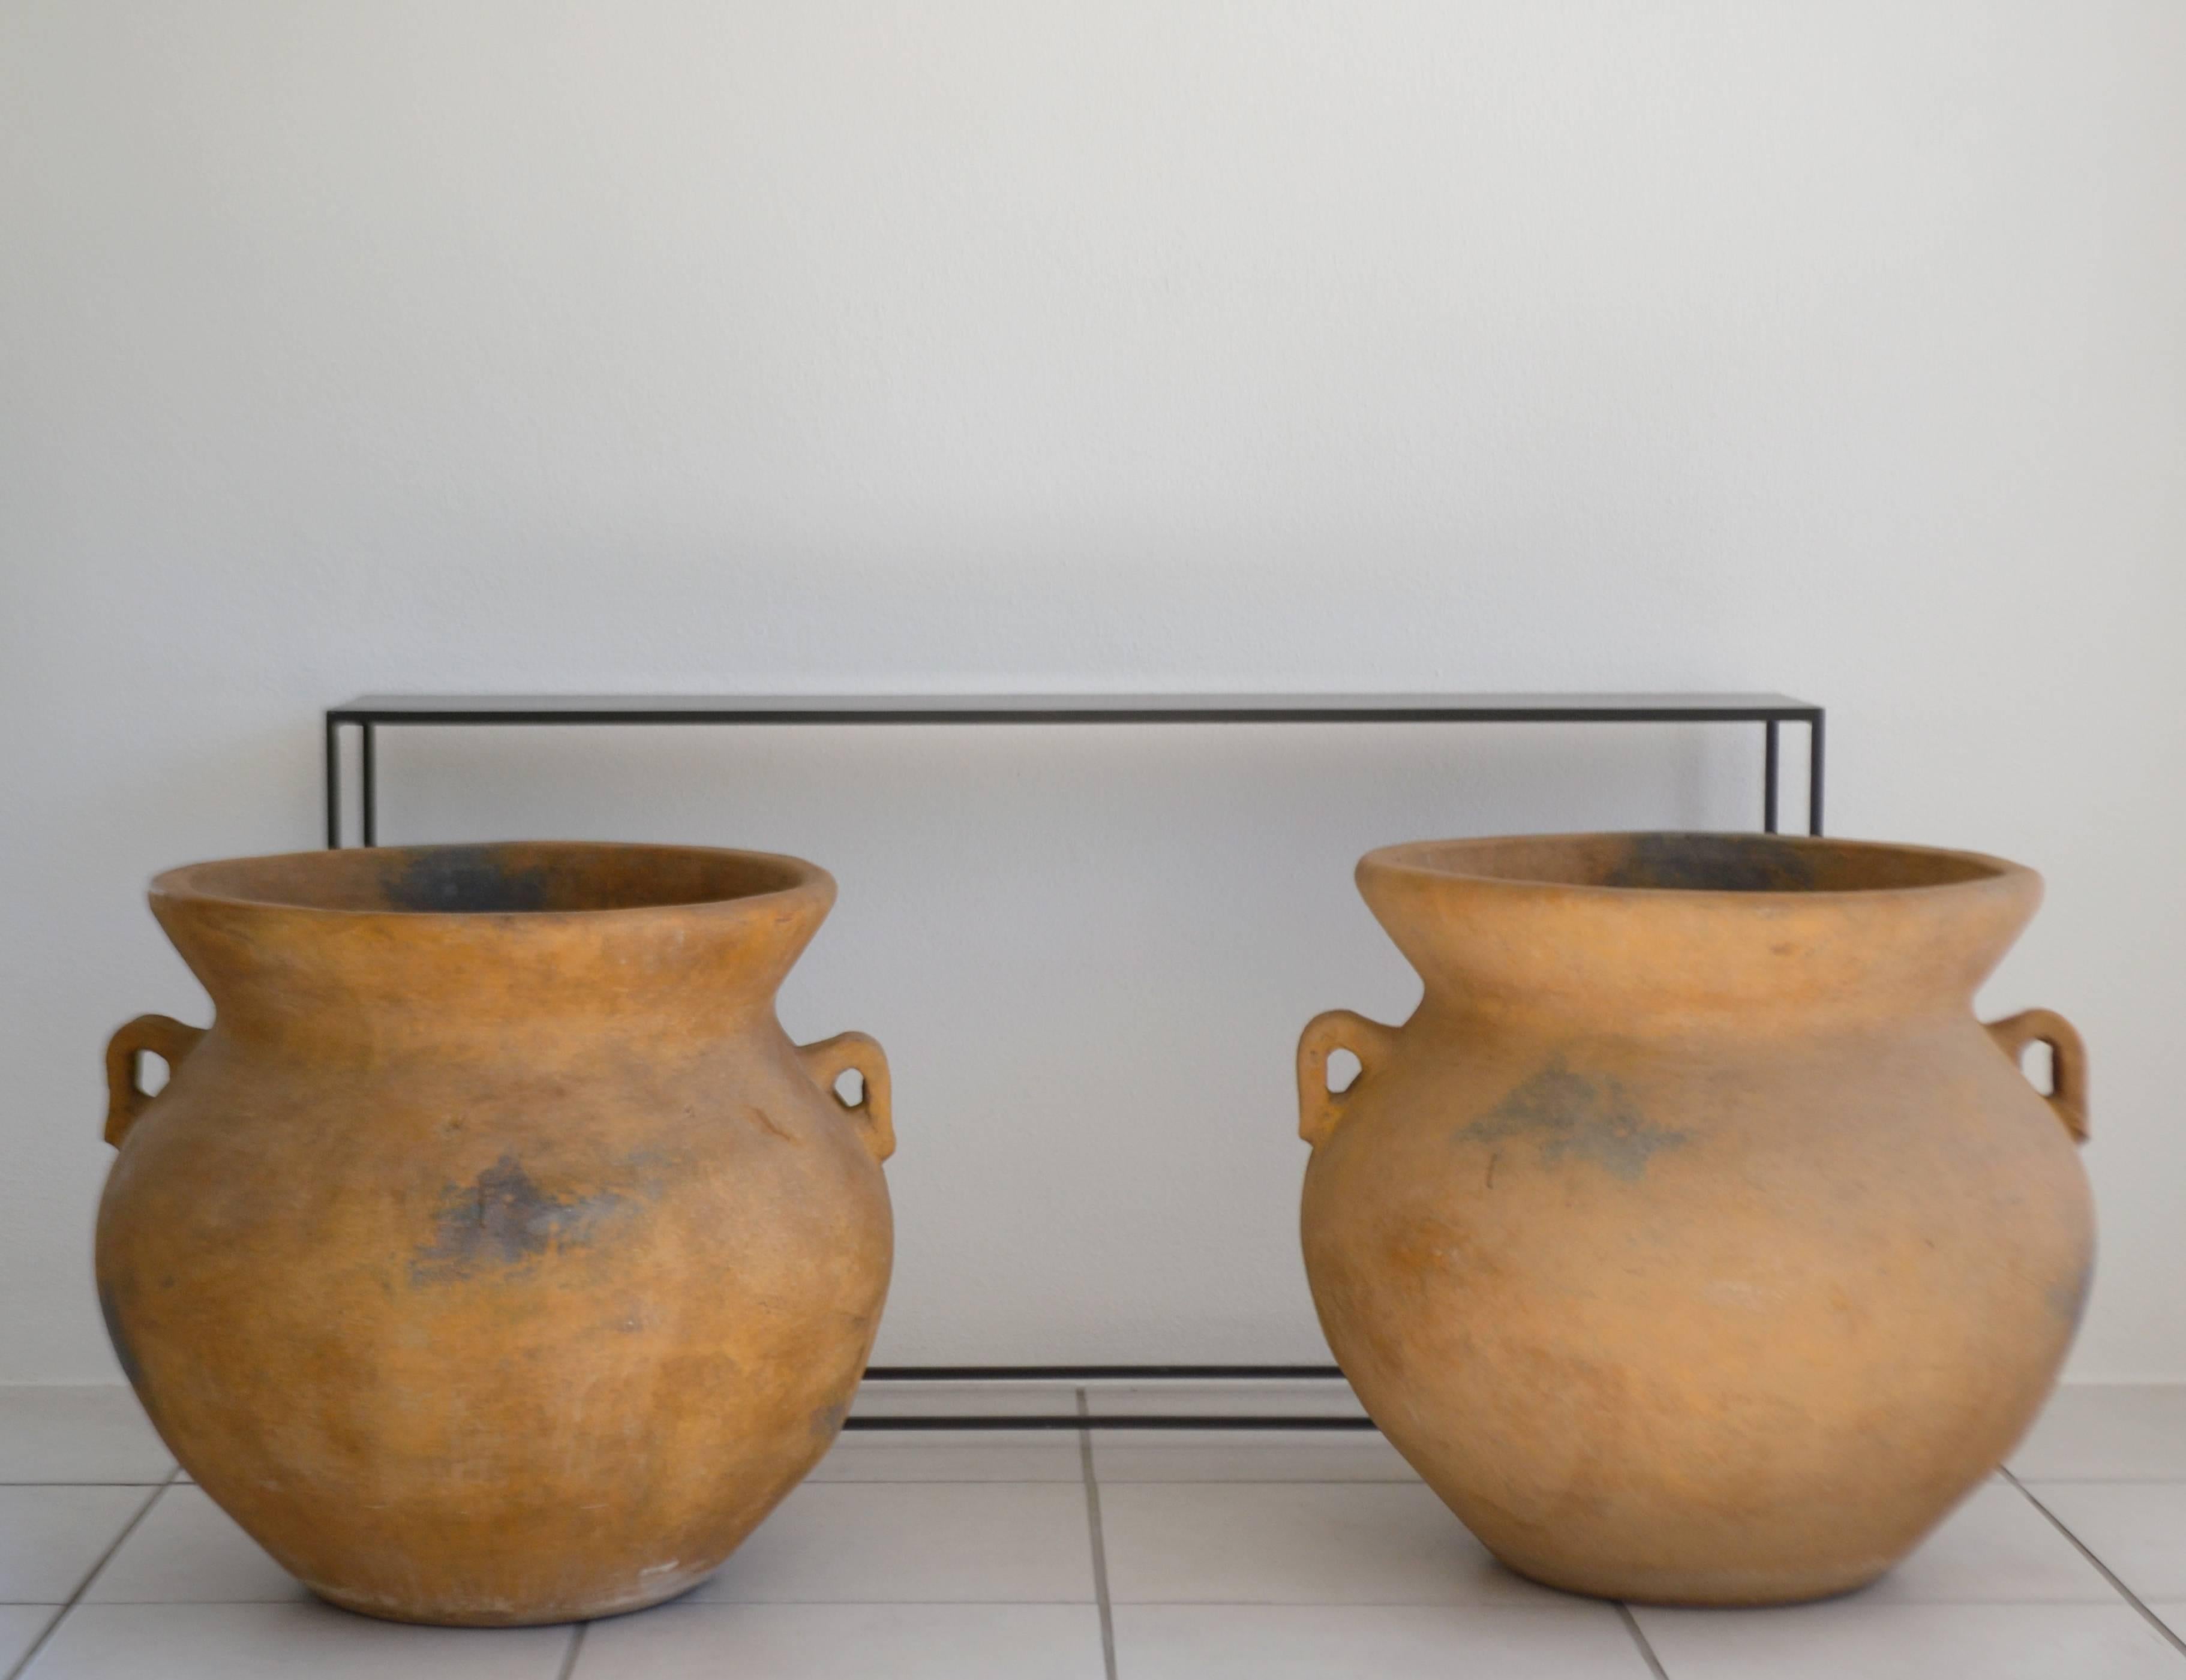 Pair of monumental Italian terracotta urn form garden planters, circa 1950s-1960s. These striking jardinieres have beautifully aged with a natural worn and weathered patina.